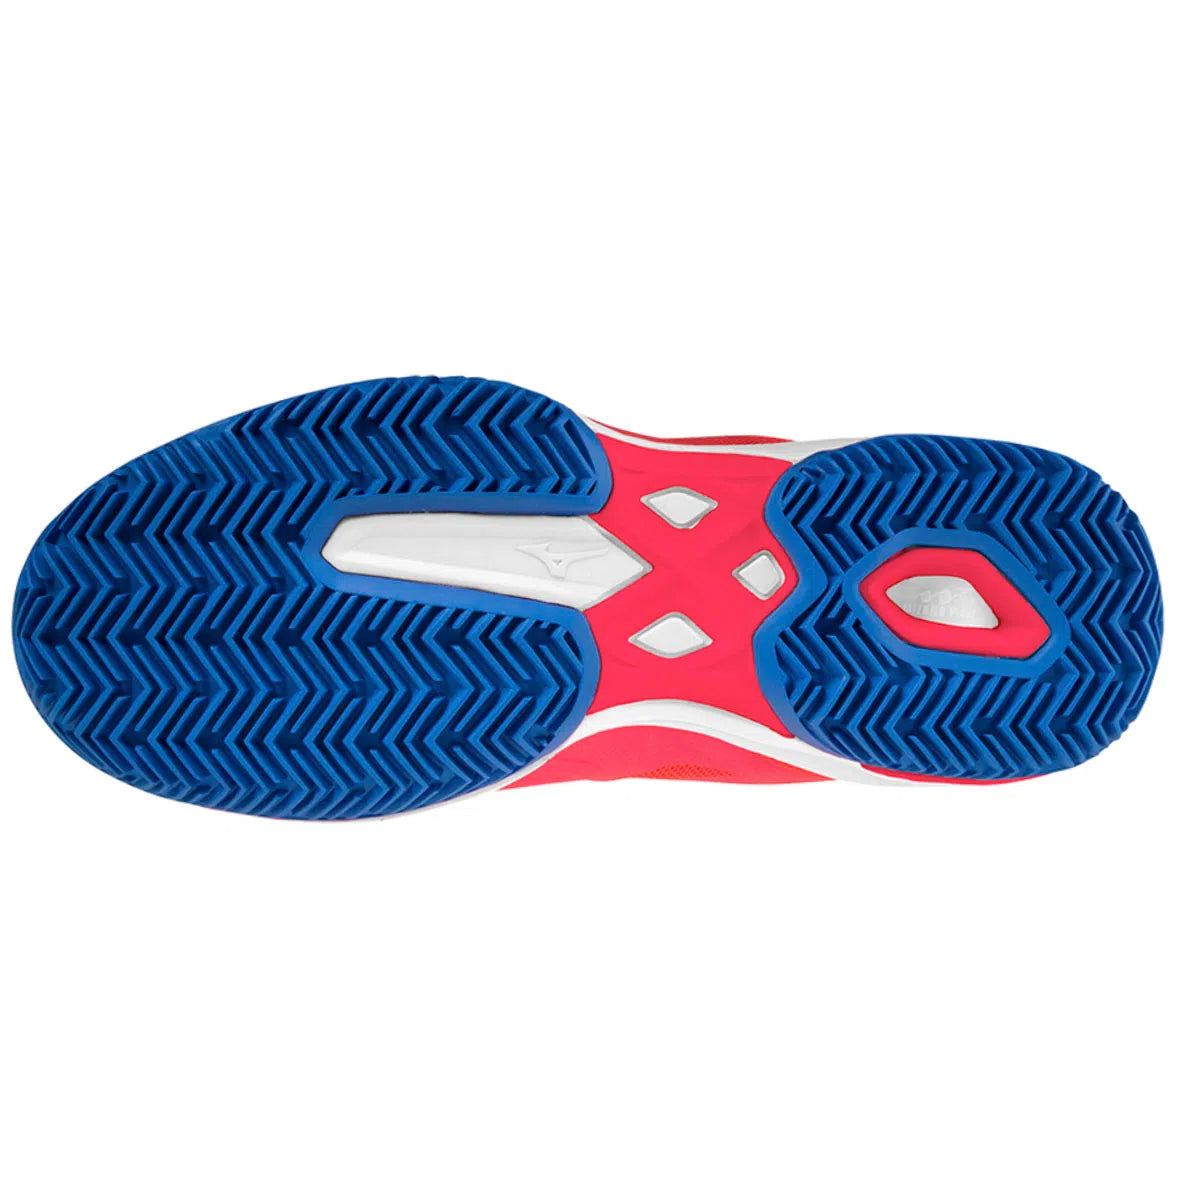 WAVE EXCEED LIGHT PADEL SHOES FOR WOMEN